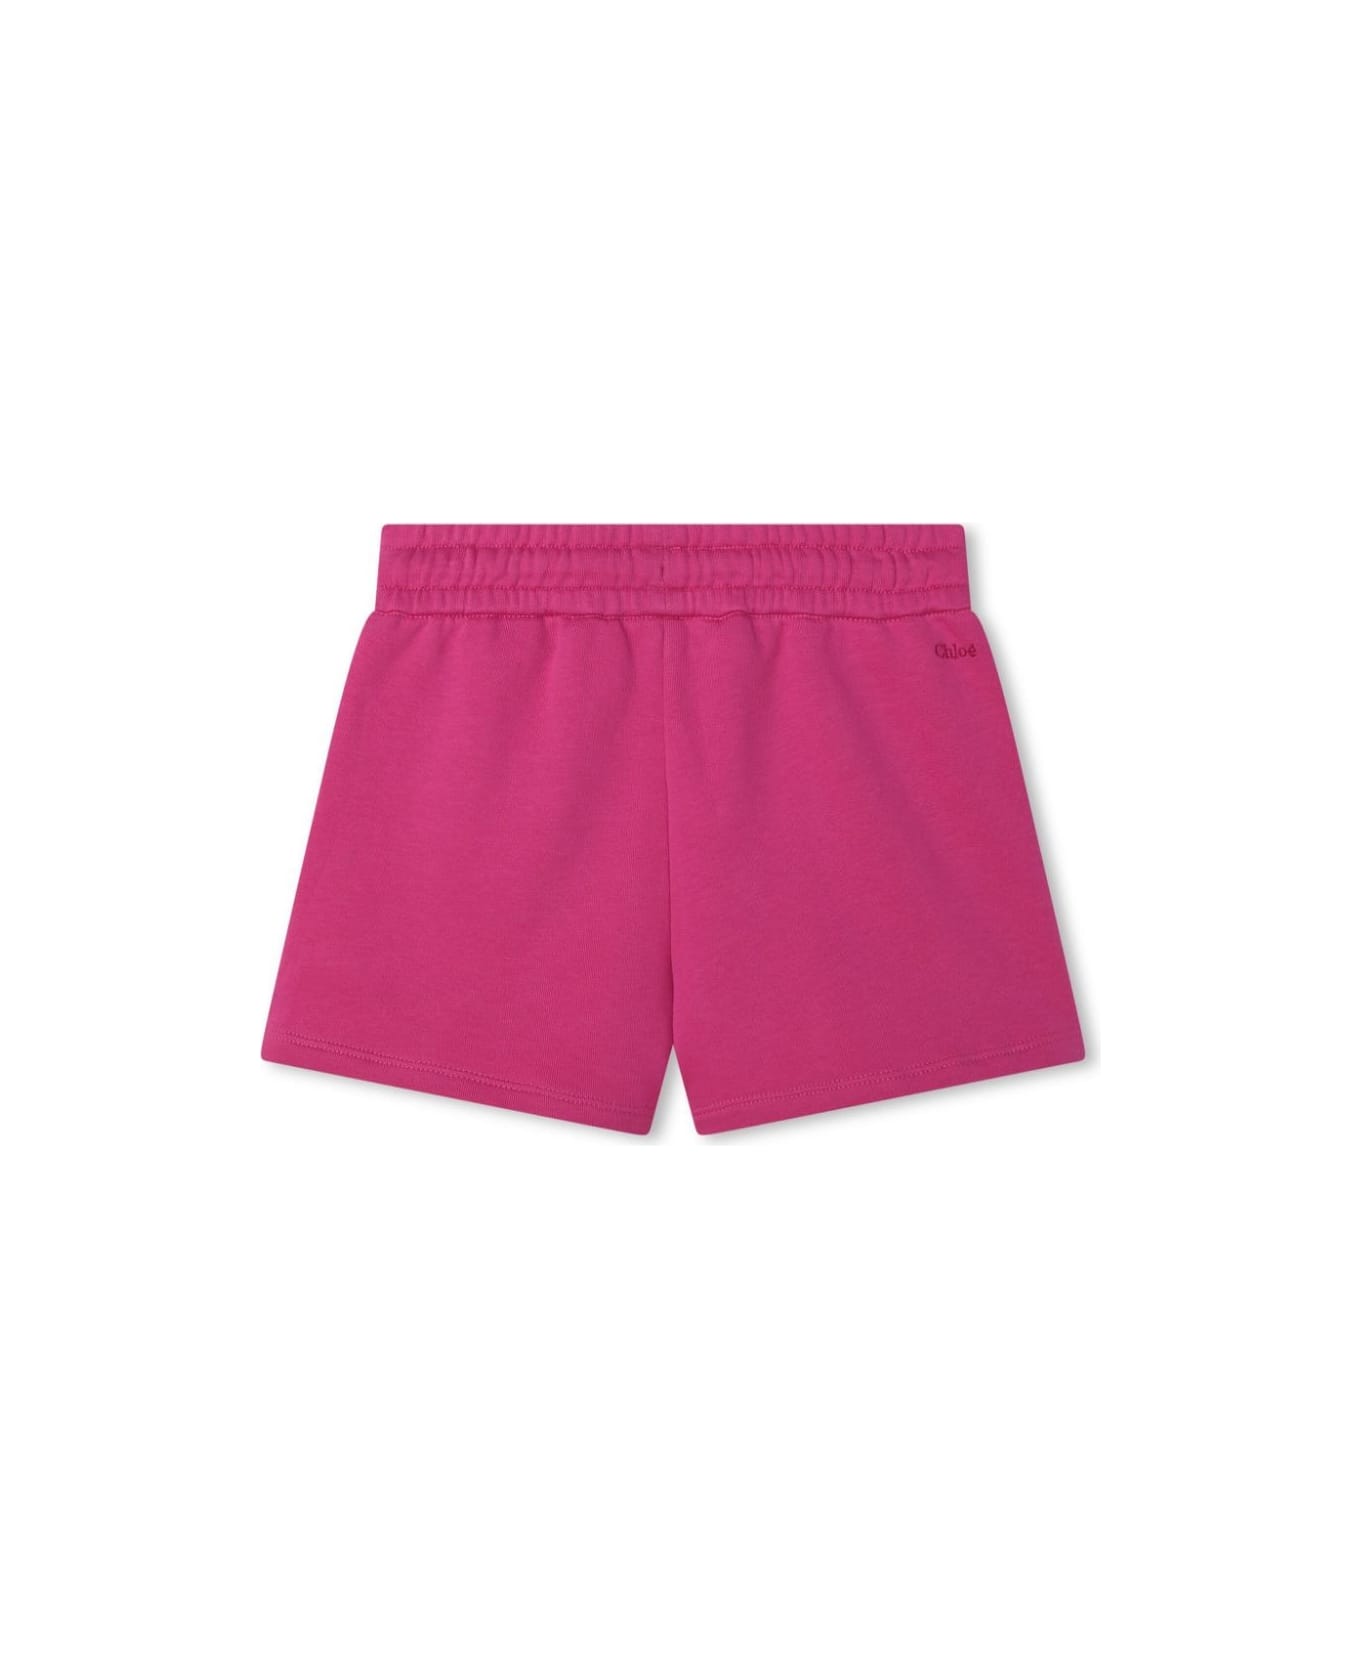 Chloé Fuchsia Sporty Shorts With Studs - Pink ボトムス